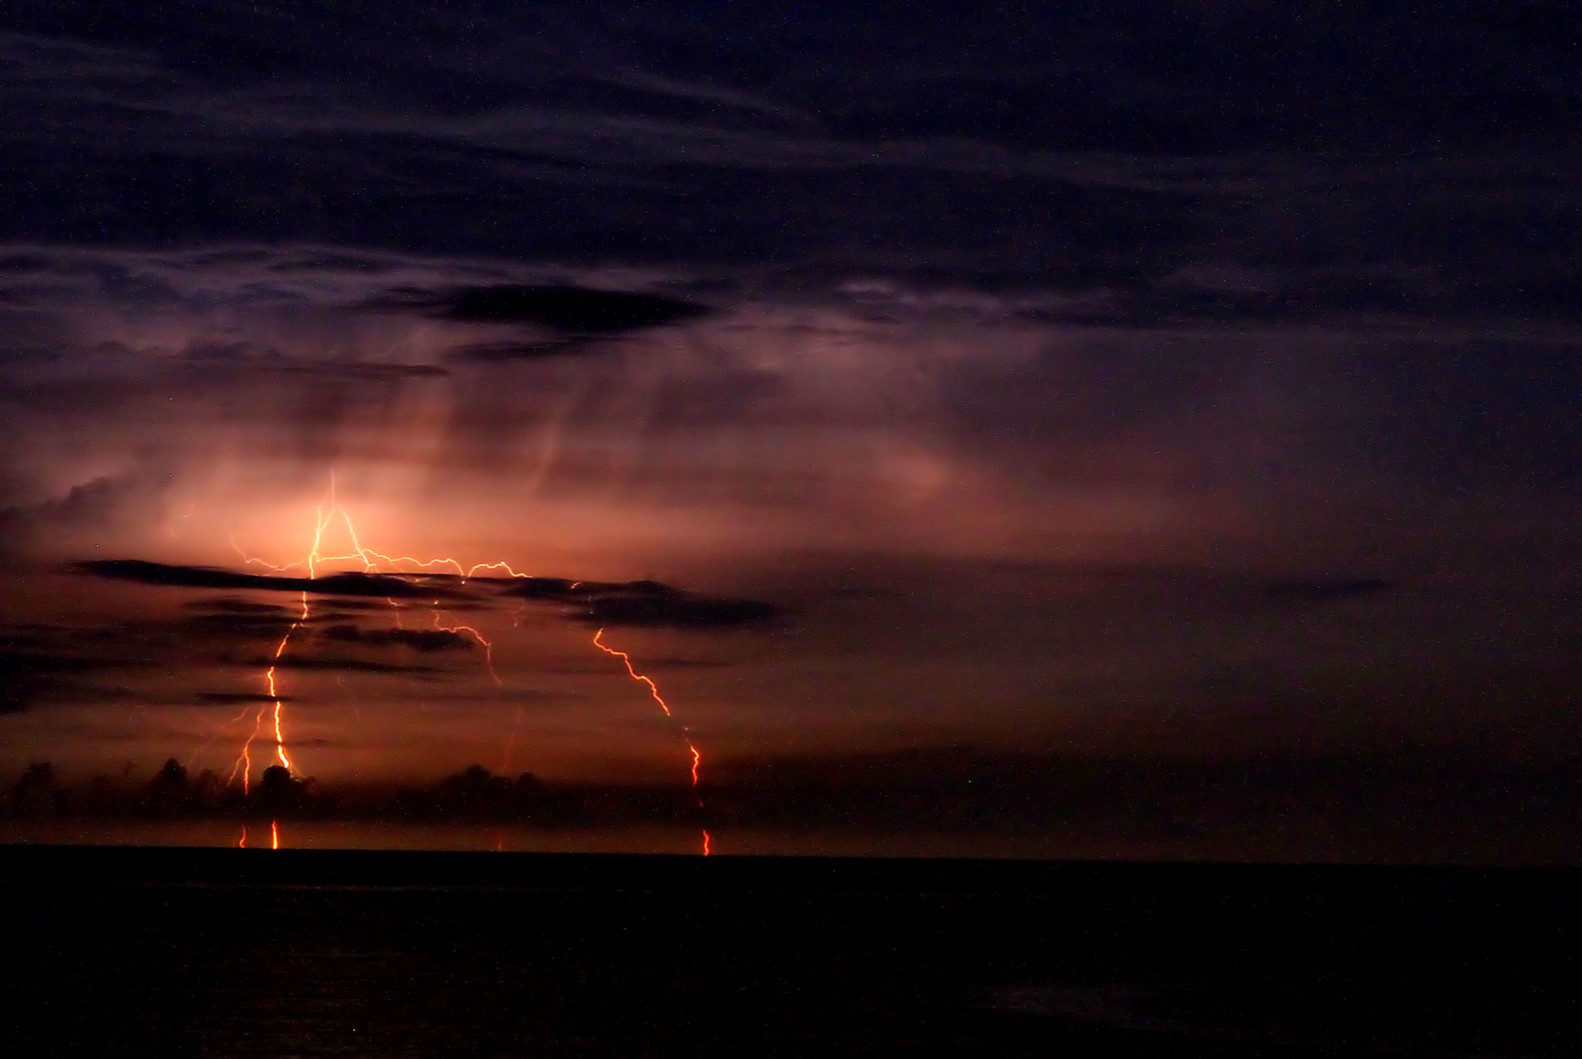 Lightning on the water at sunset.